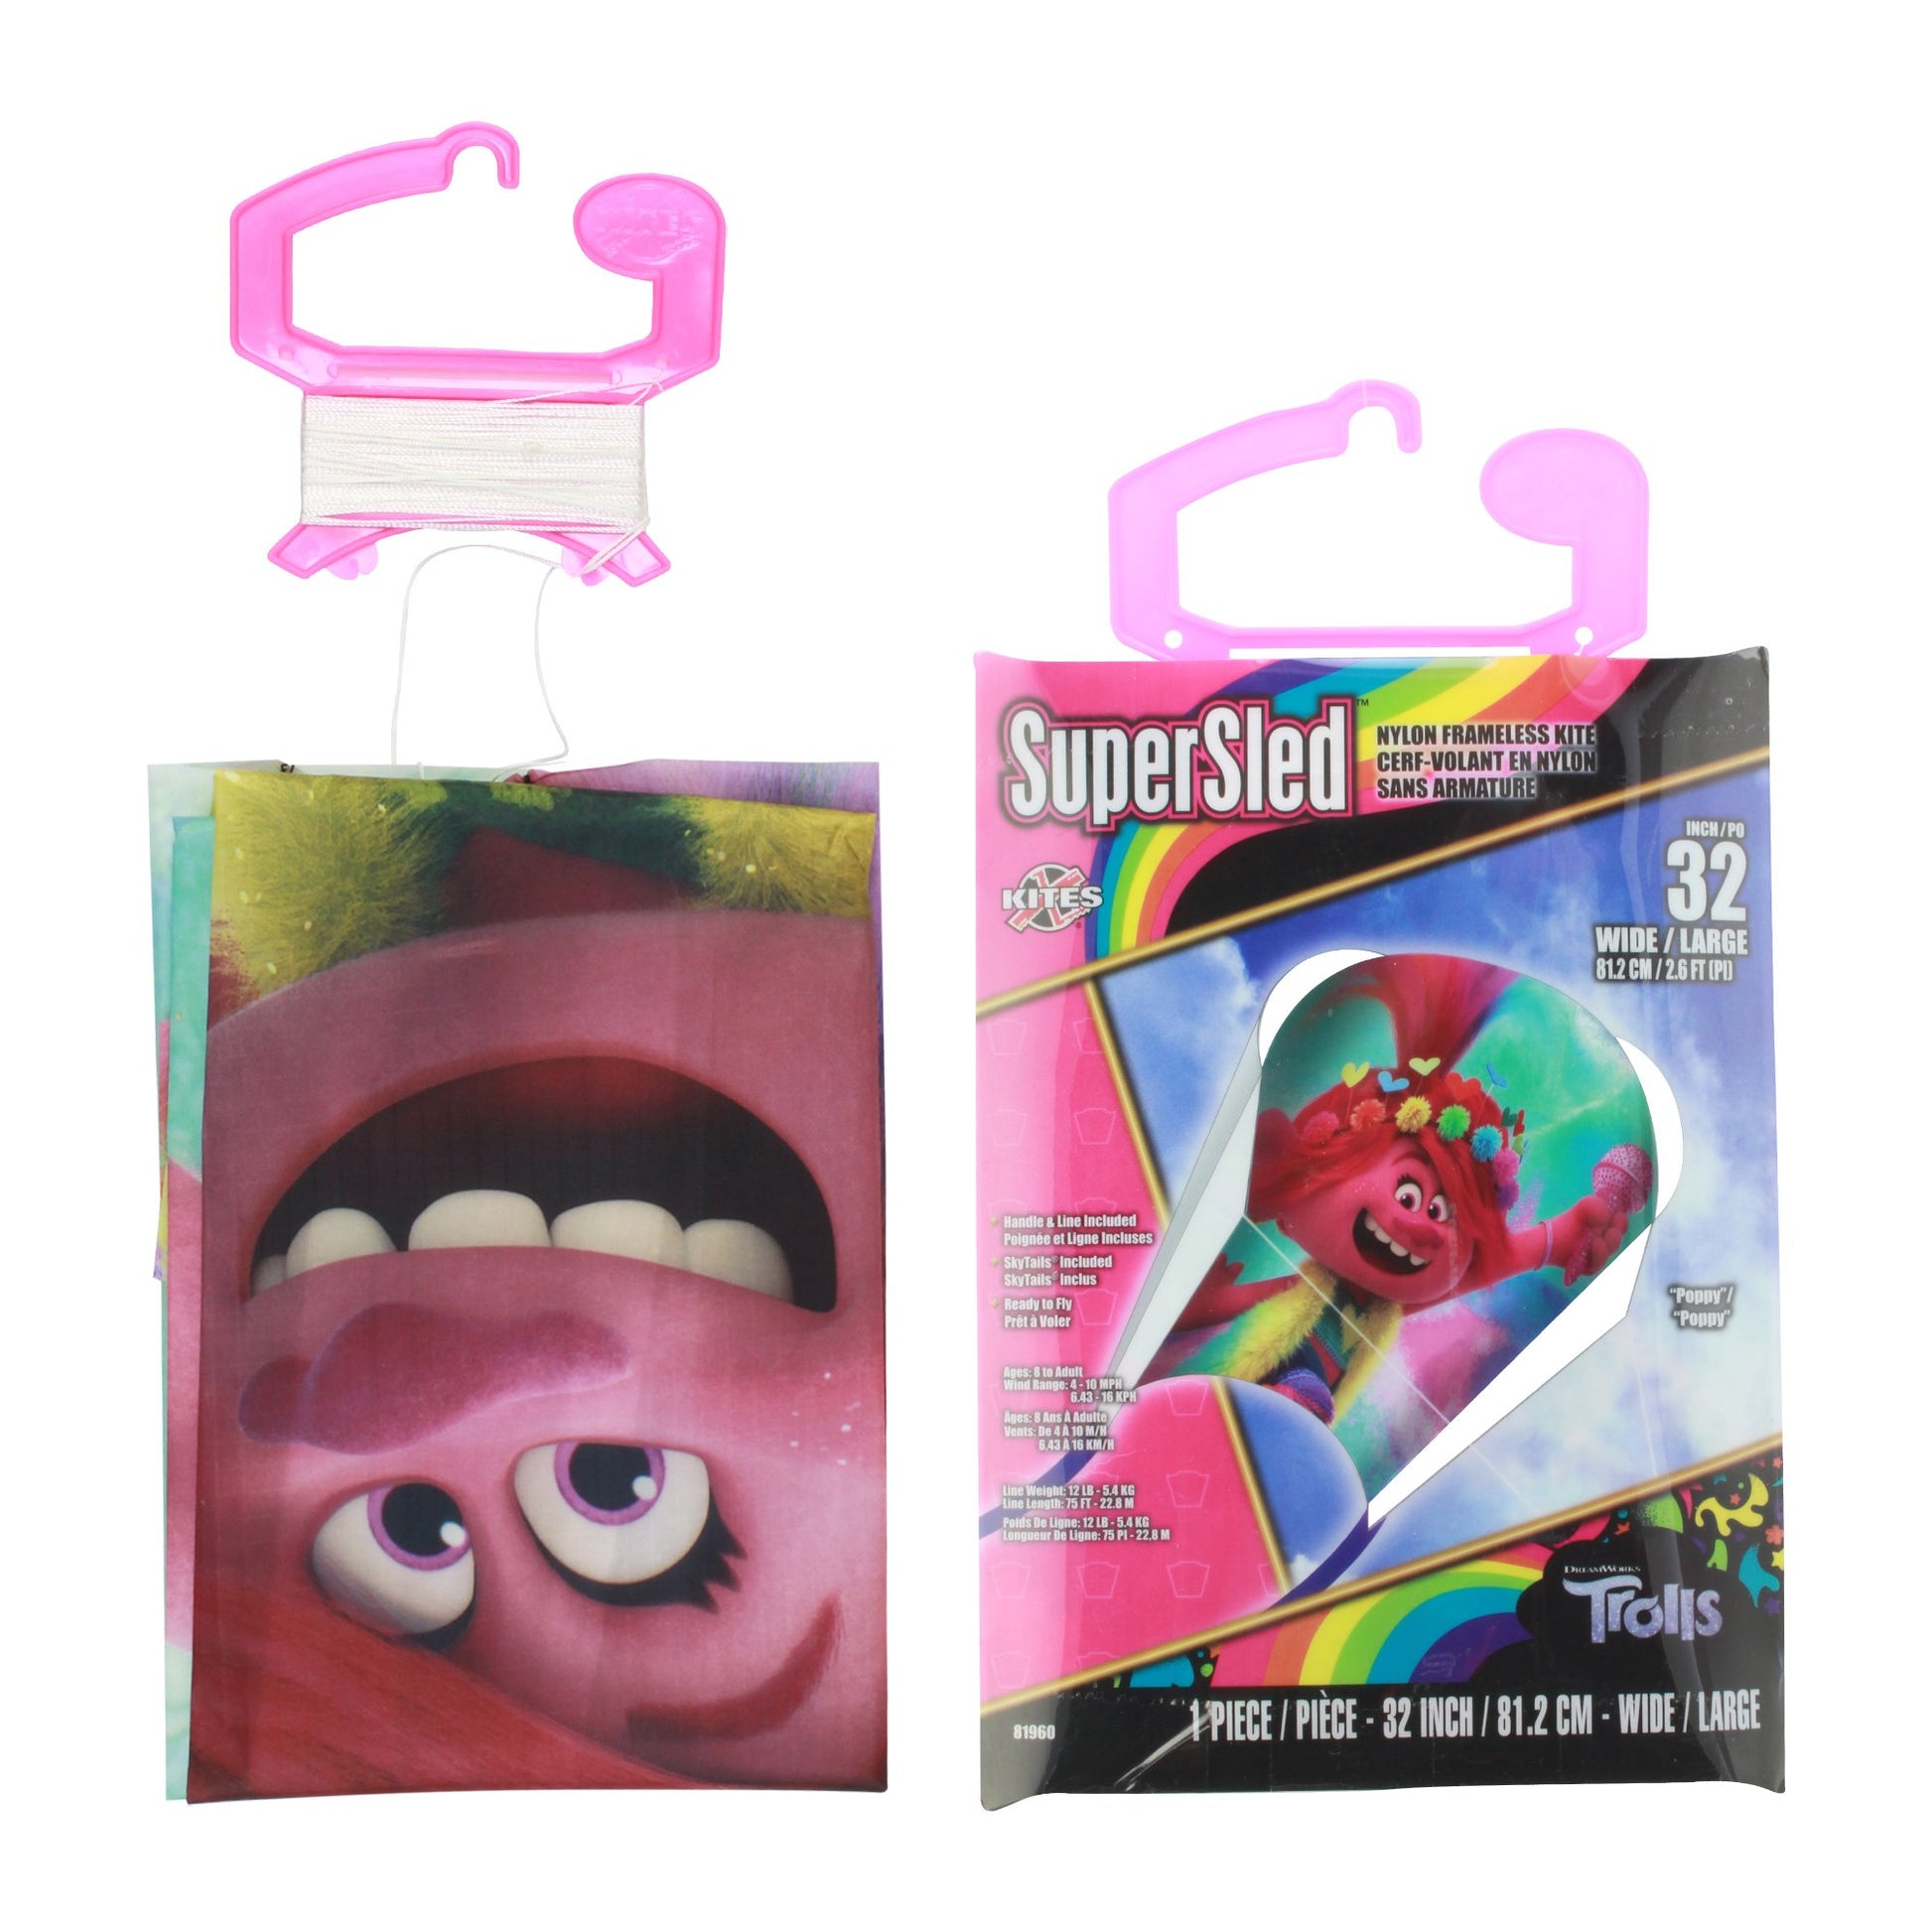 X Kites SuperSled Trolls Nylon Kite packaging and contents